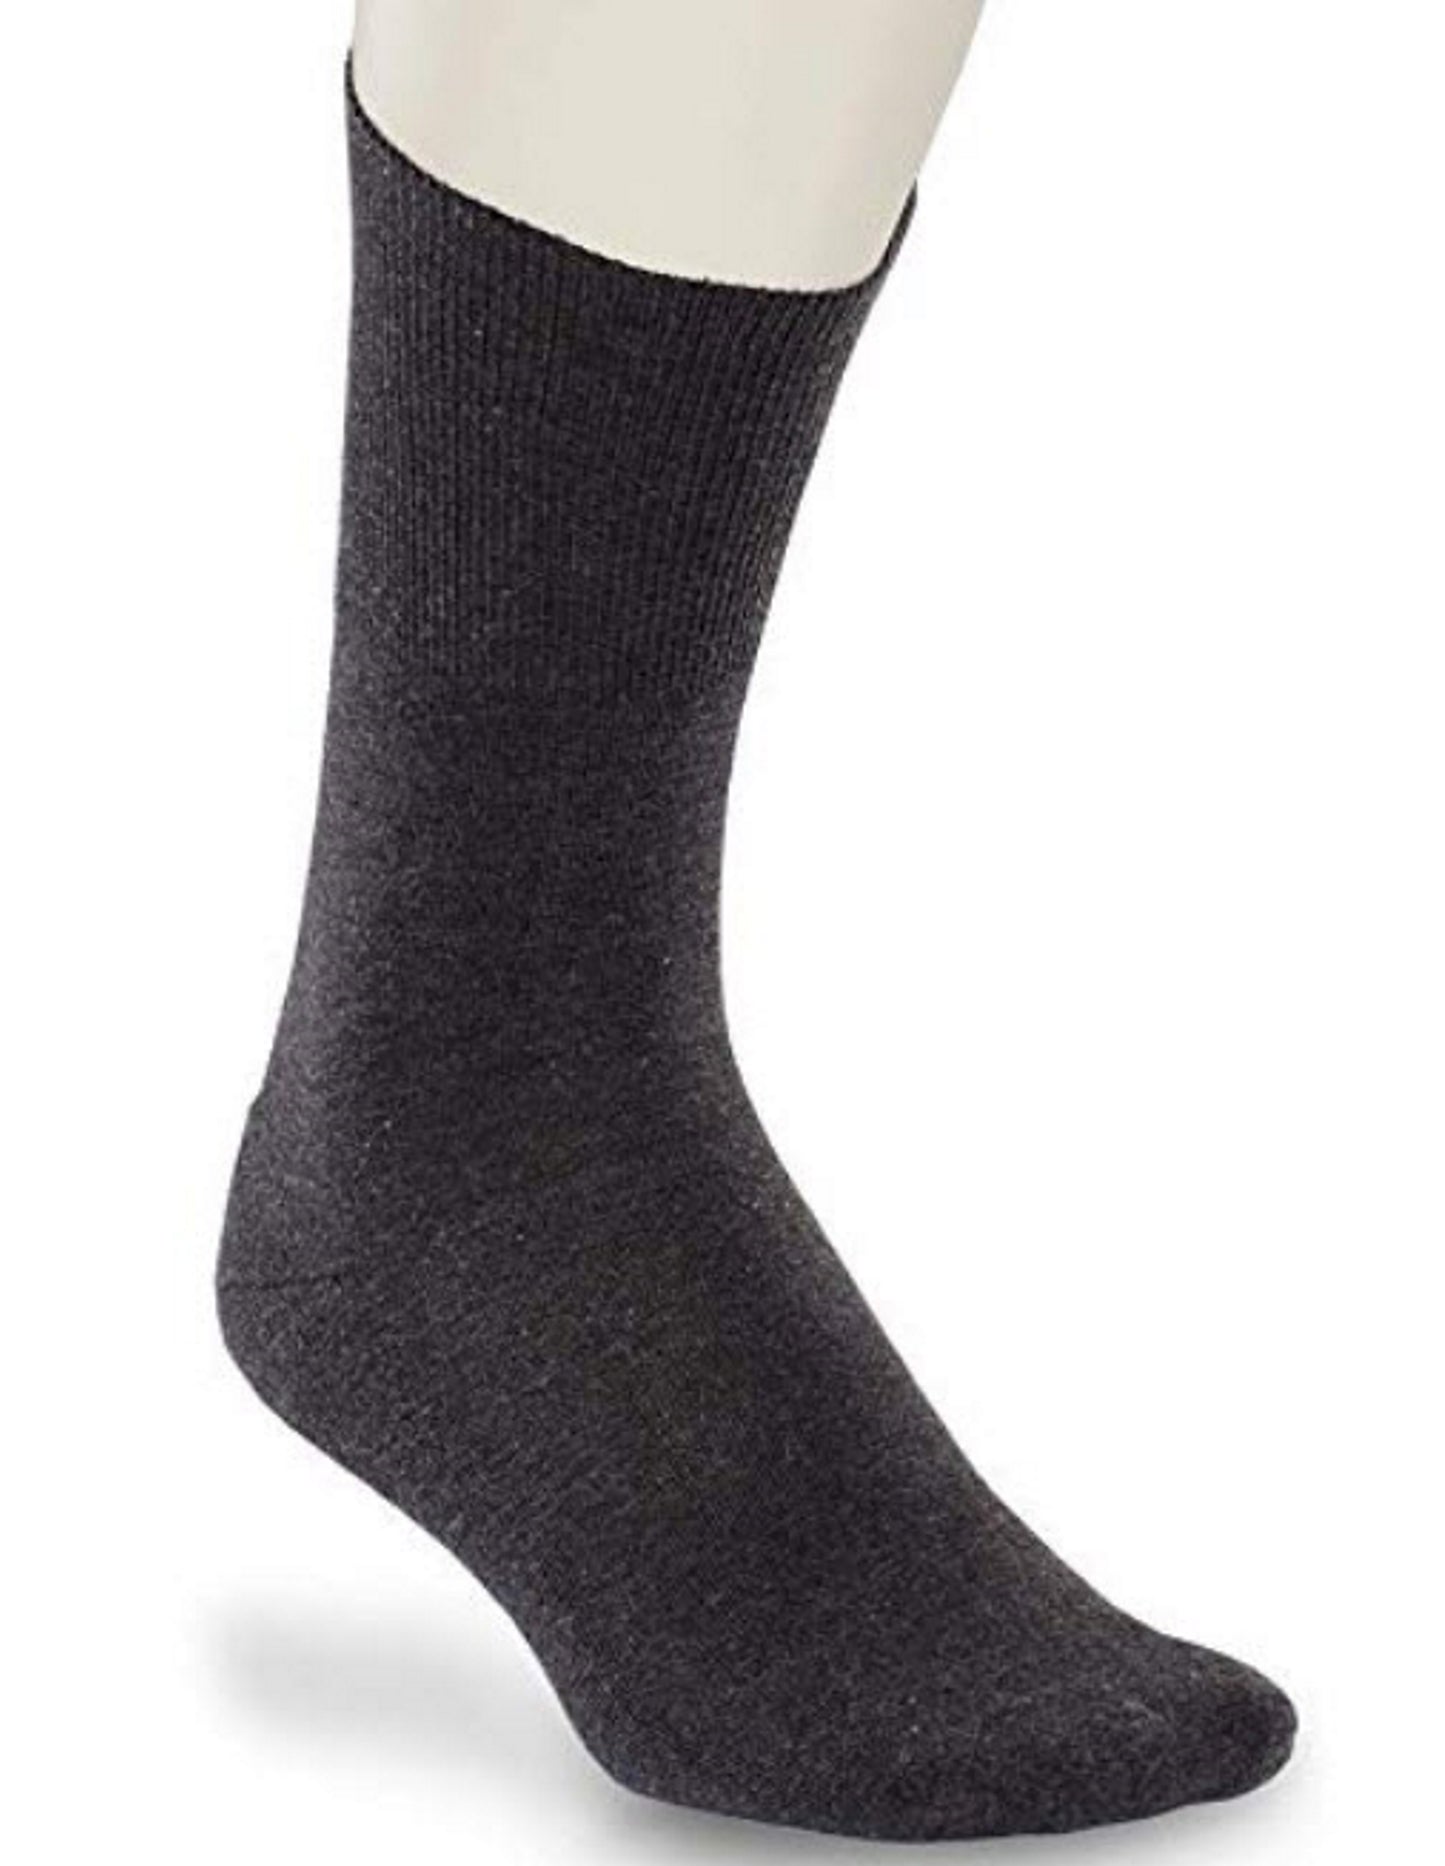 EuroChoice Comfort Non-Bind Stretch Socks Up to 6E